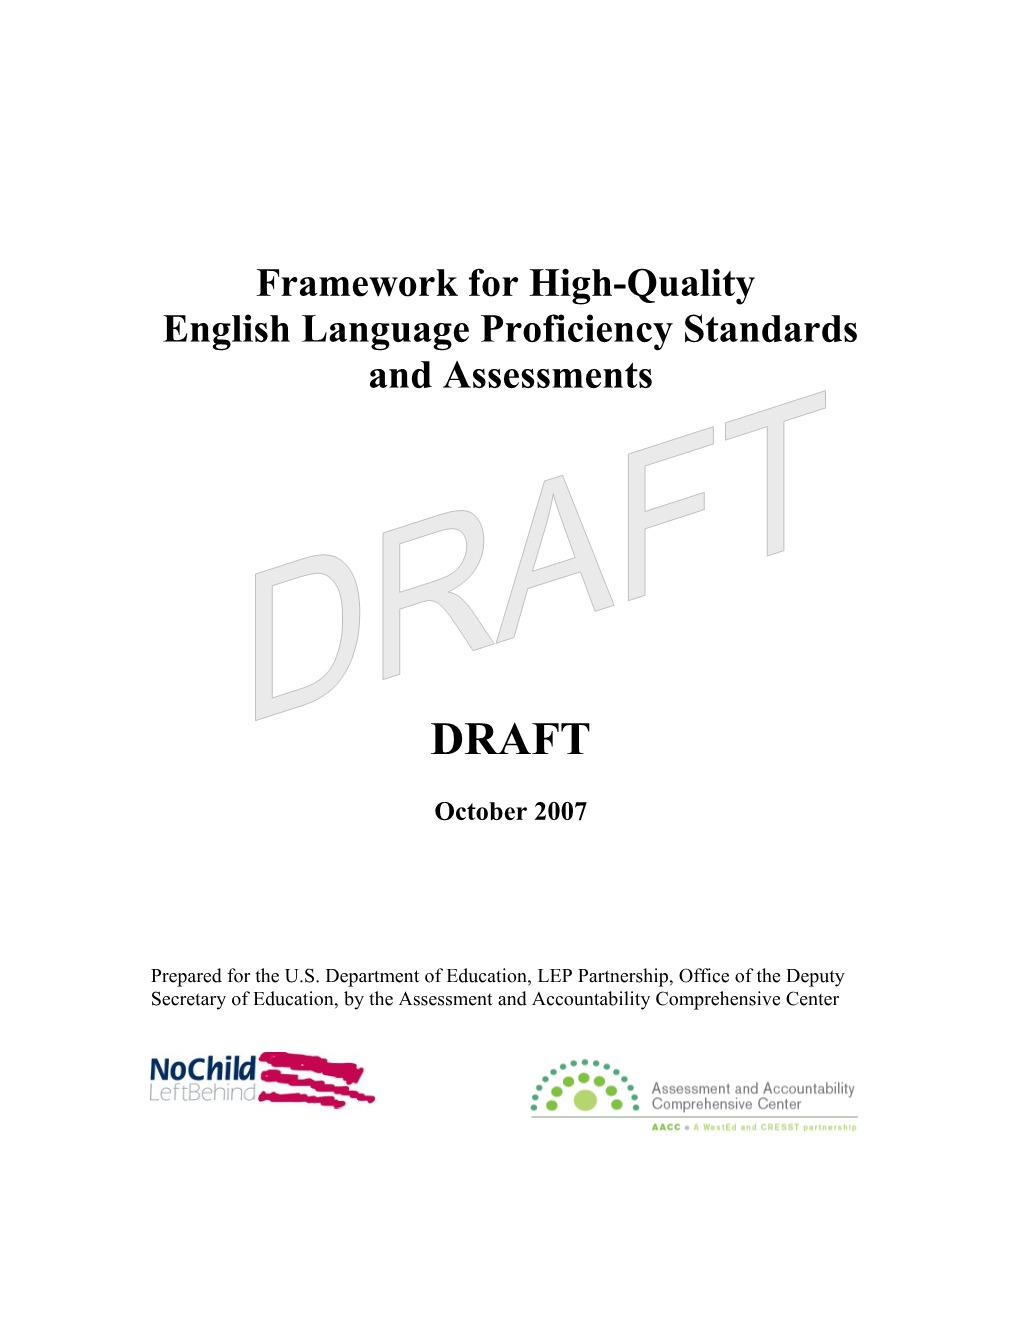 DRAFT Framework for High-Quality English Language Proficiency Standards and Assessments